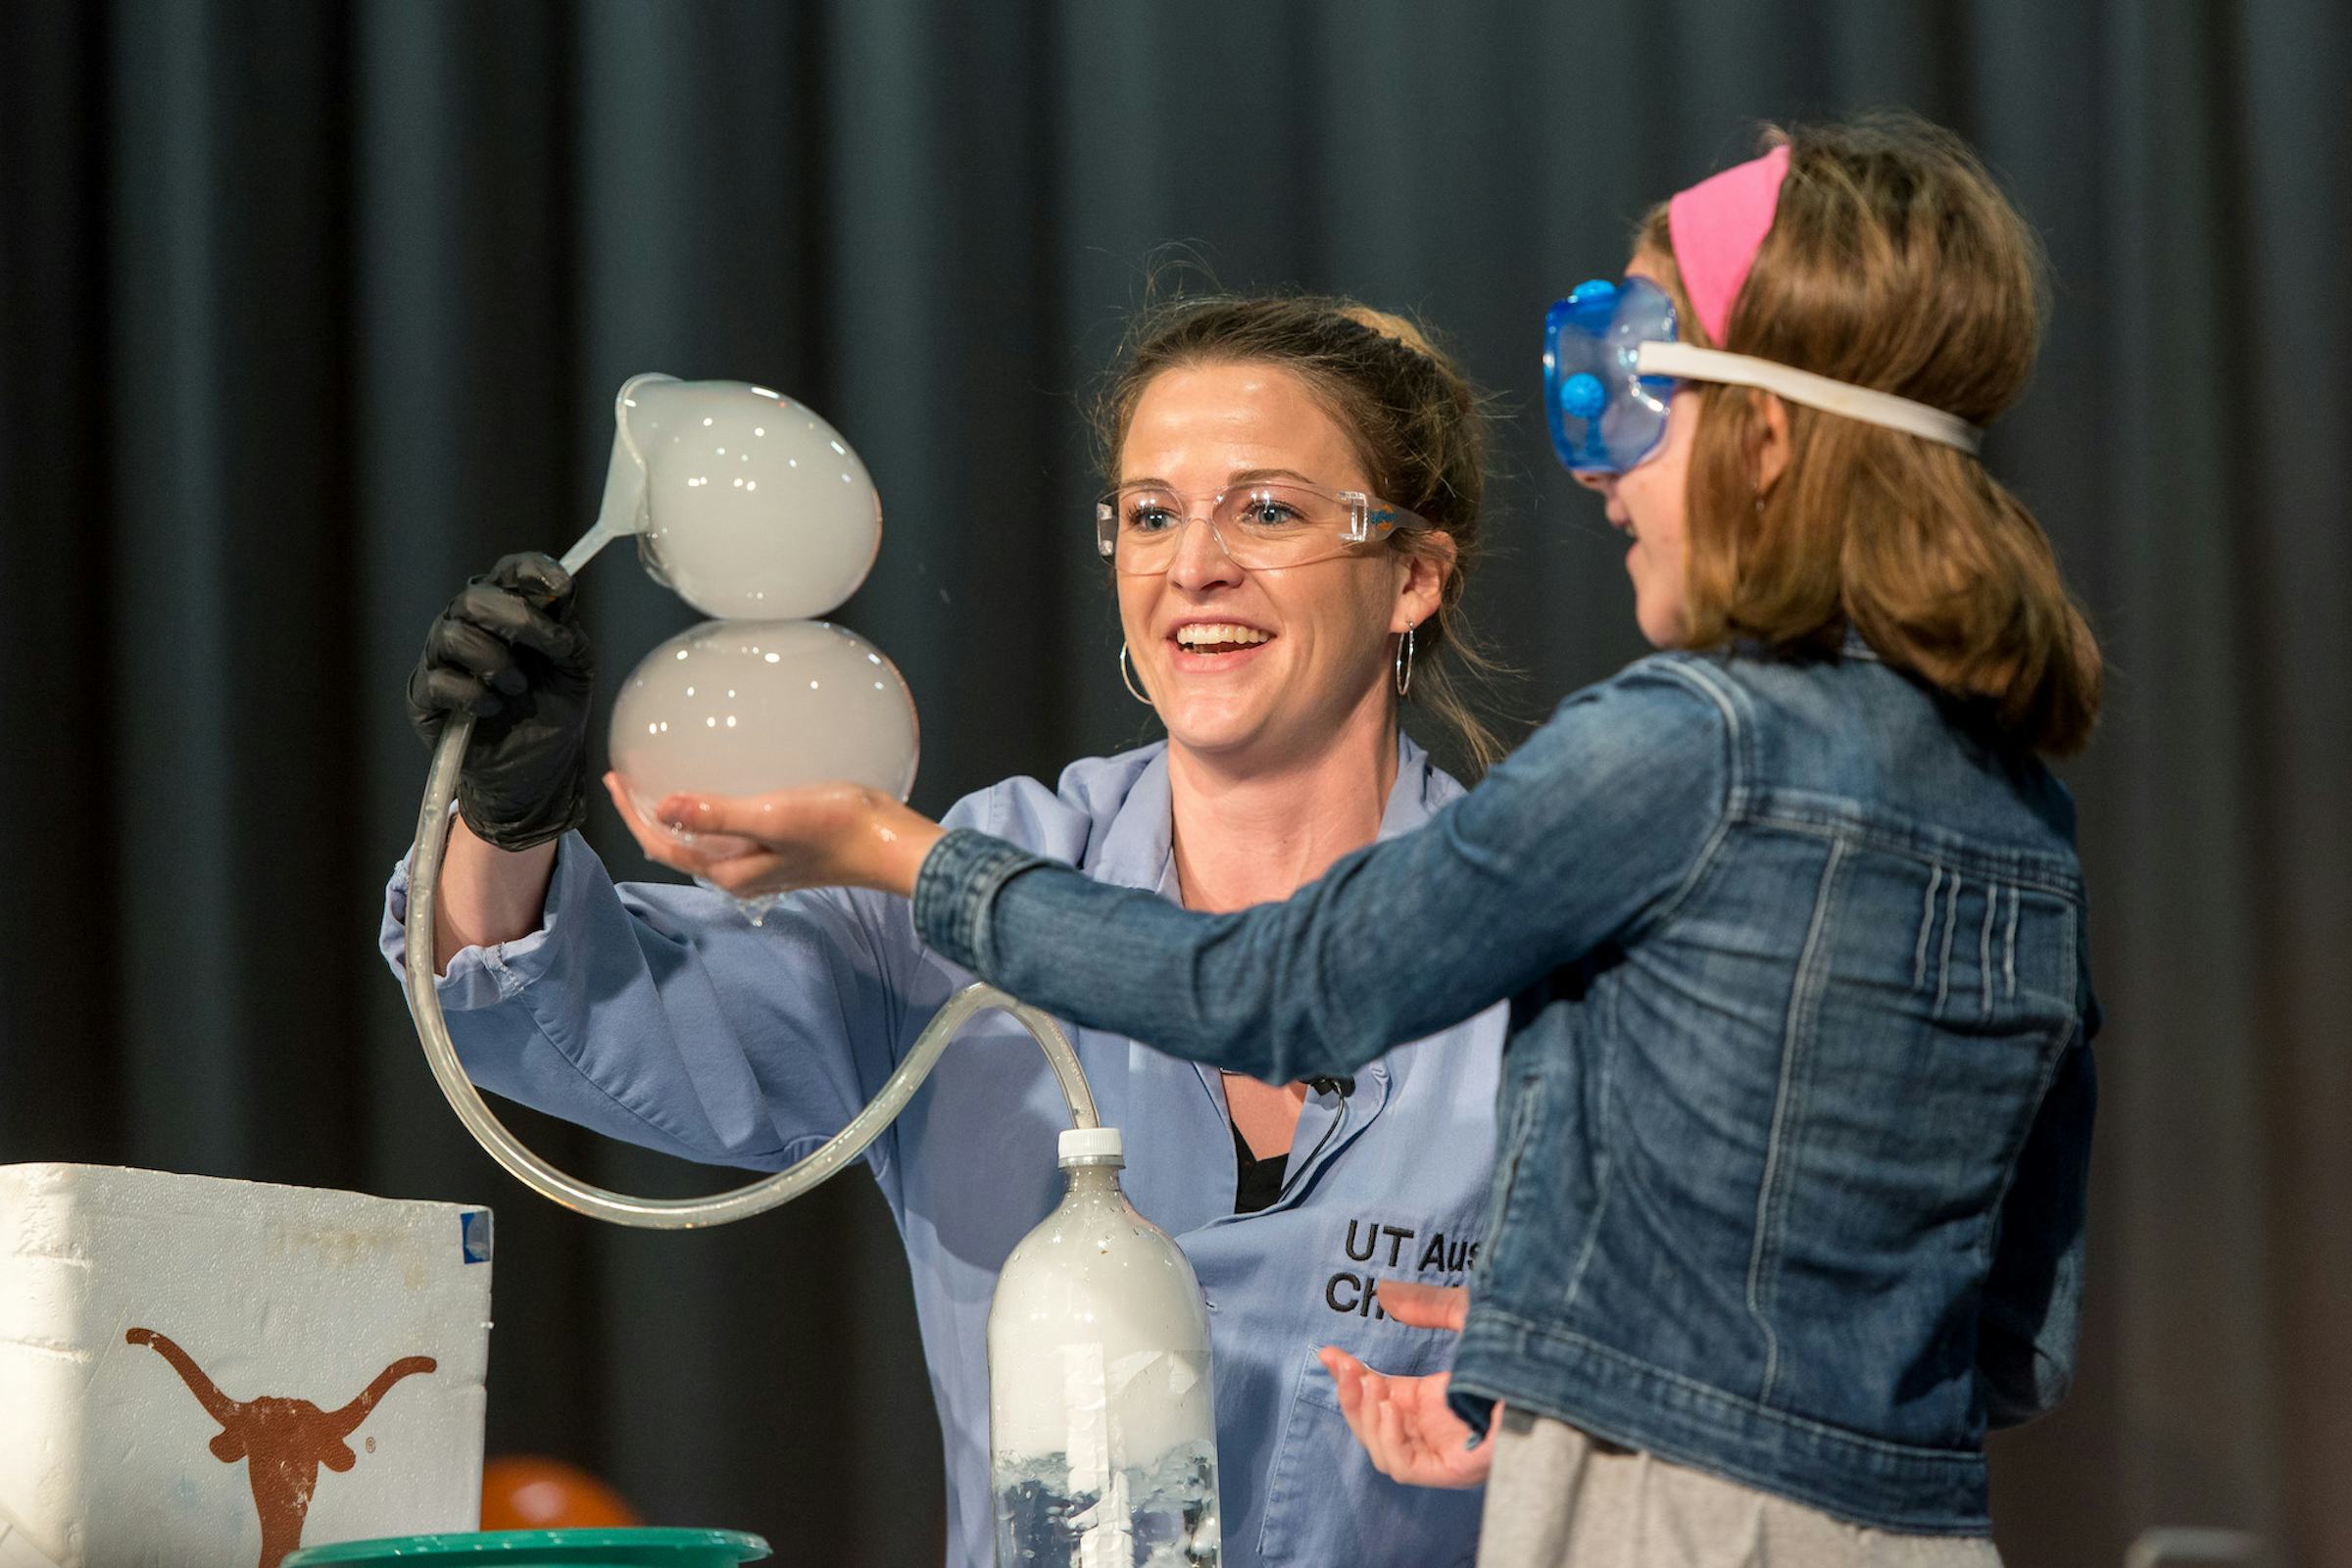 An elementary student marvels at a live chemistry demo with Kate the Chemist 